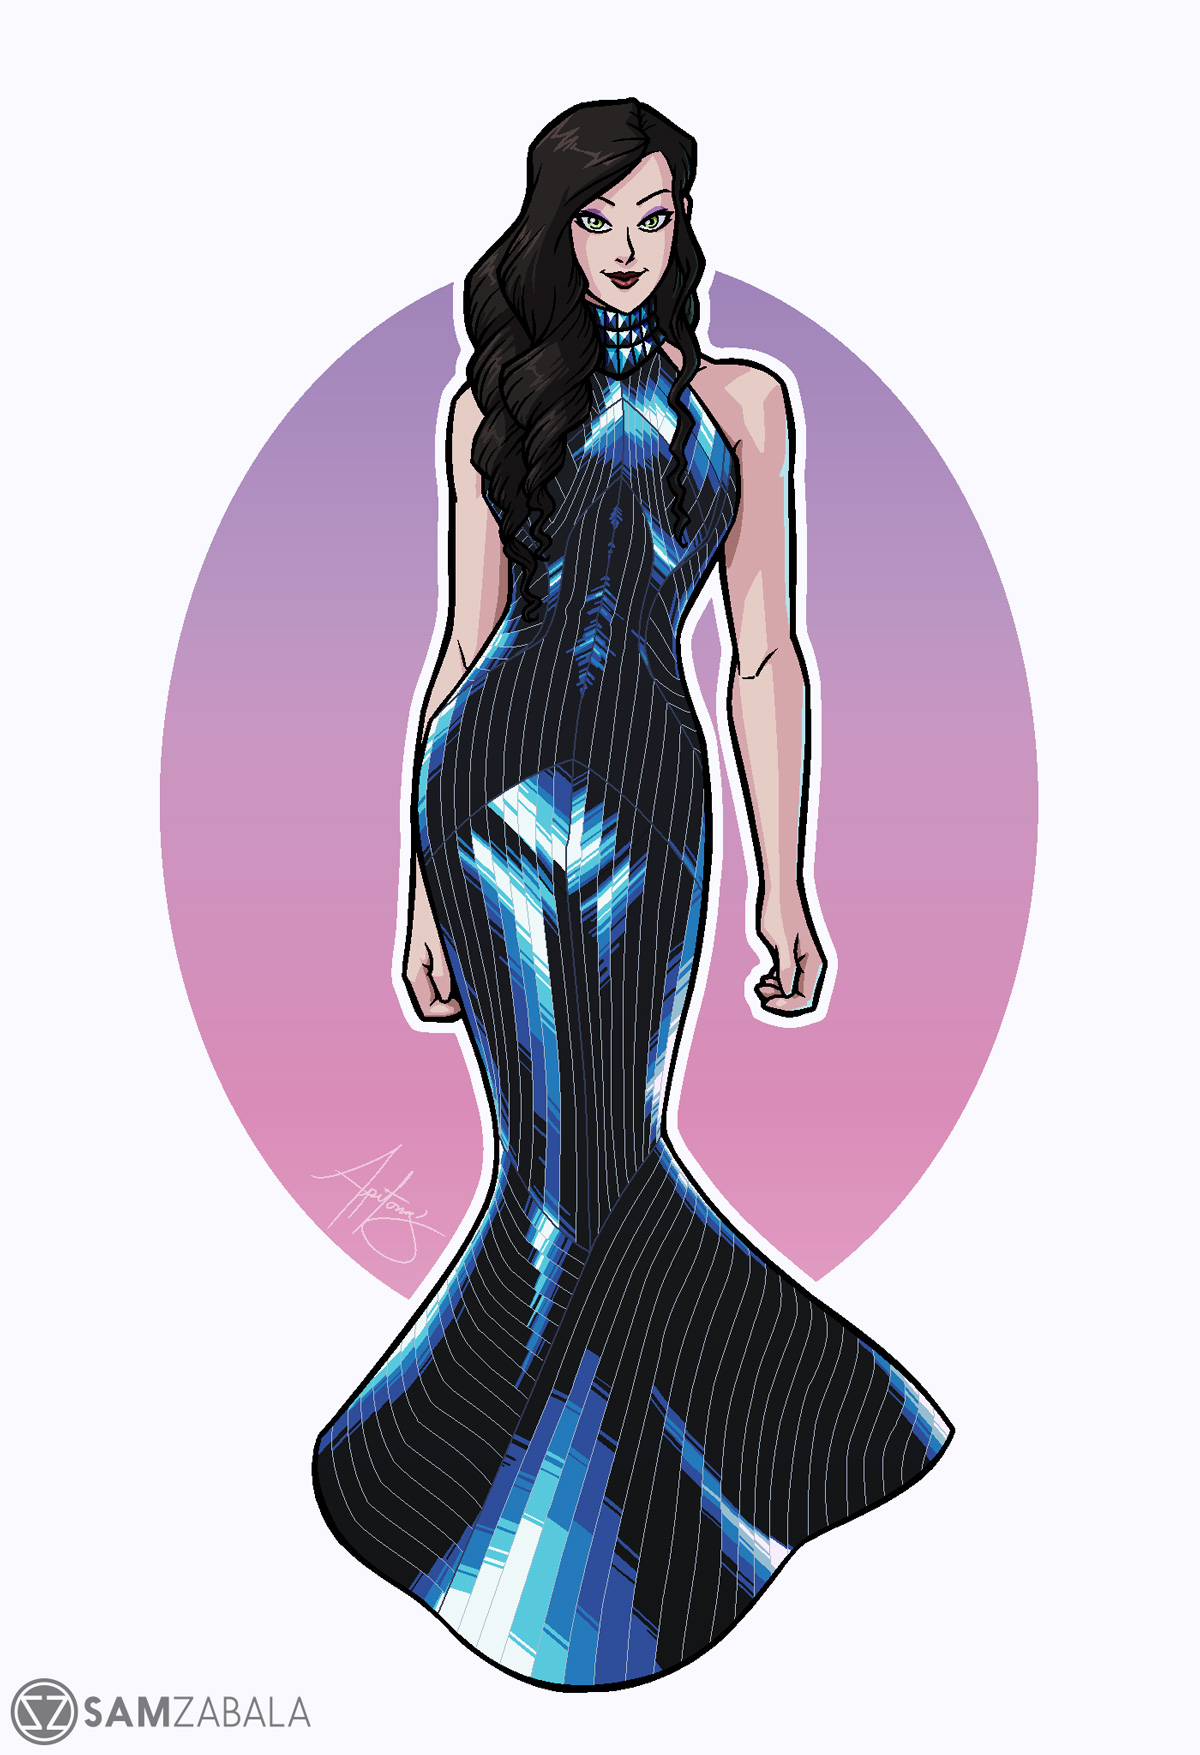 Asami Sato in a uniquely patterned designer dress with an accent pink gradient egg backdrop behind her